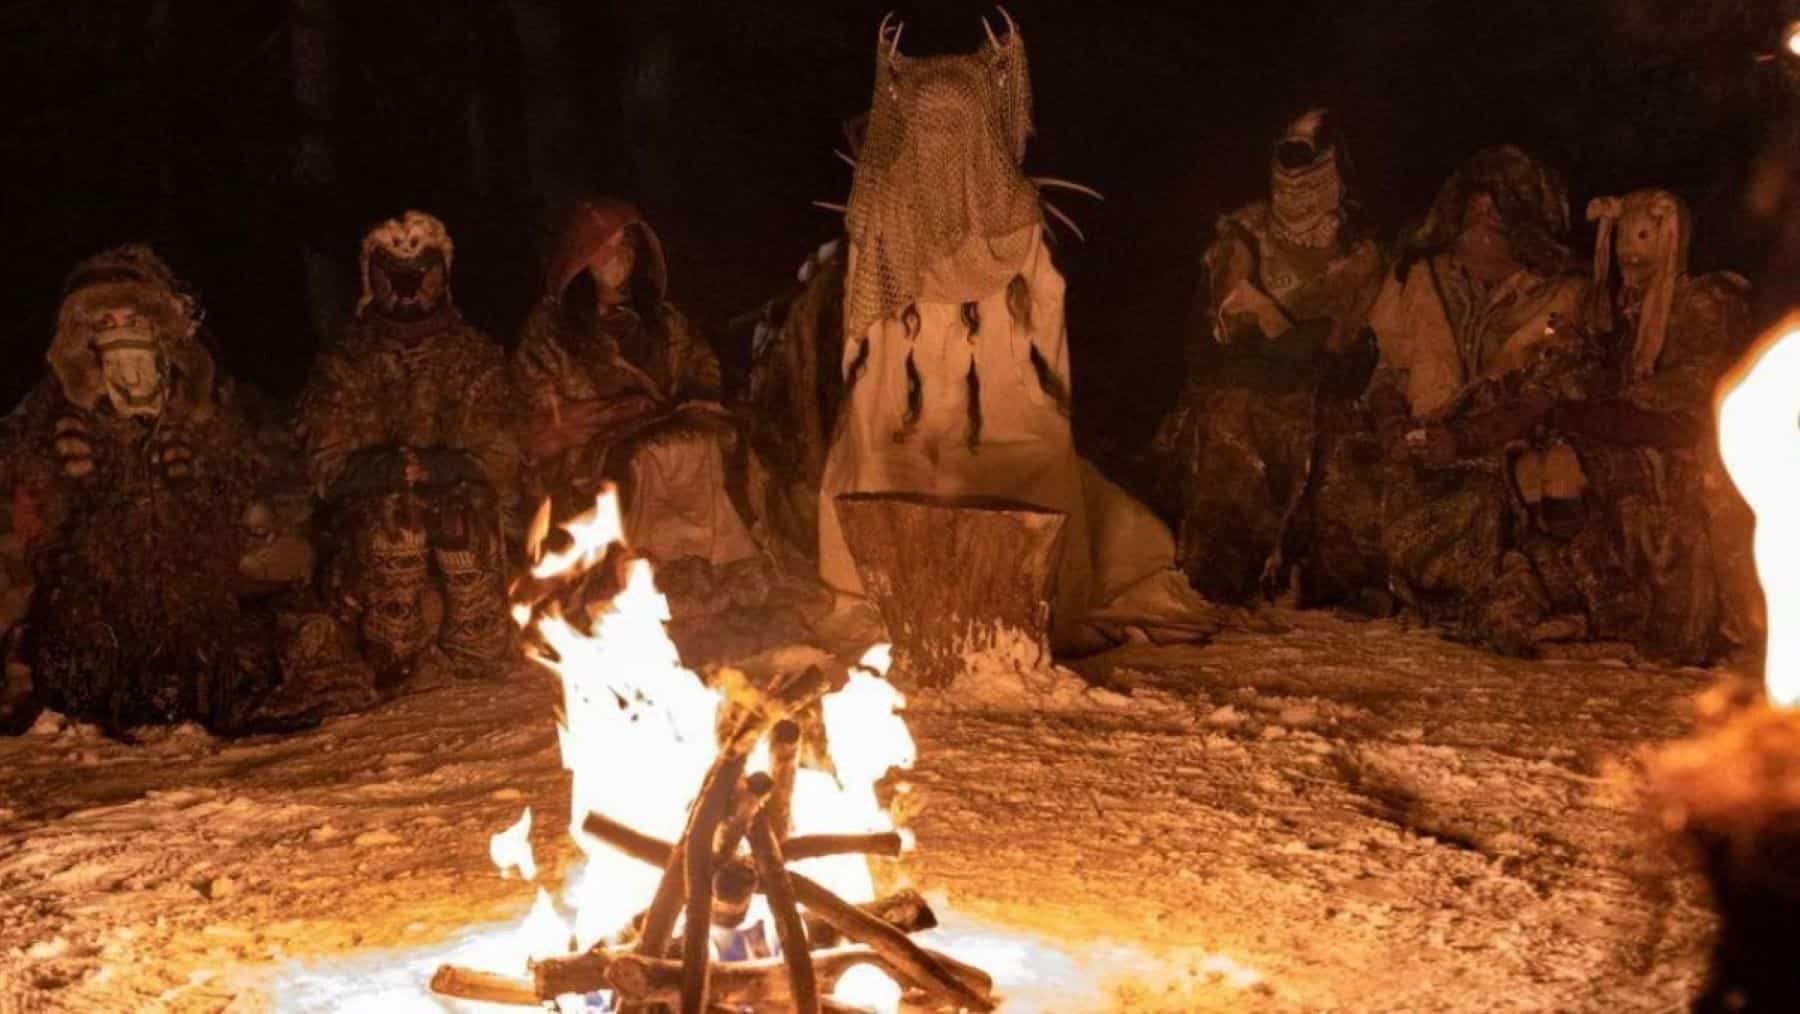 A group of masked individuals sits around a bonfire in this photo by Showtime.